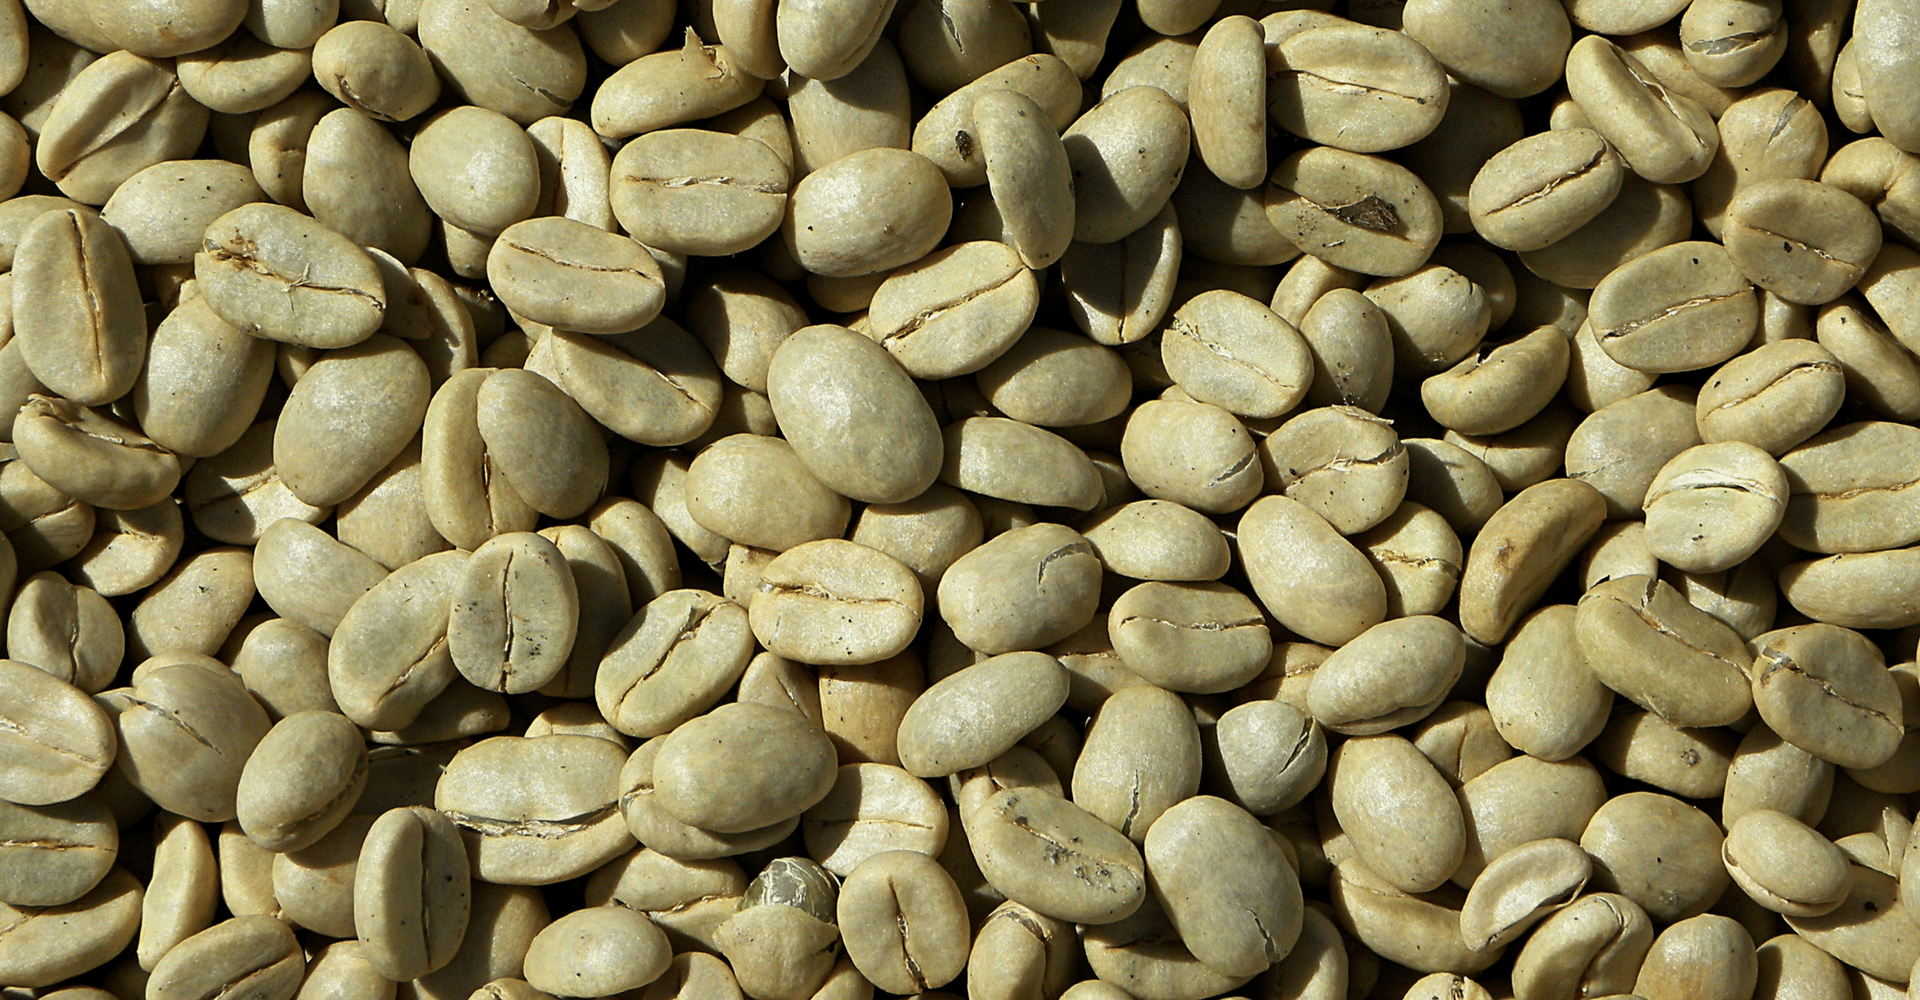 Type of Coffee - Different Beans Bring Different Flavors